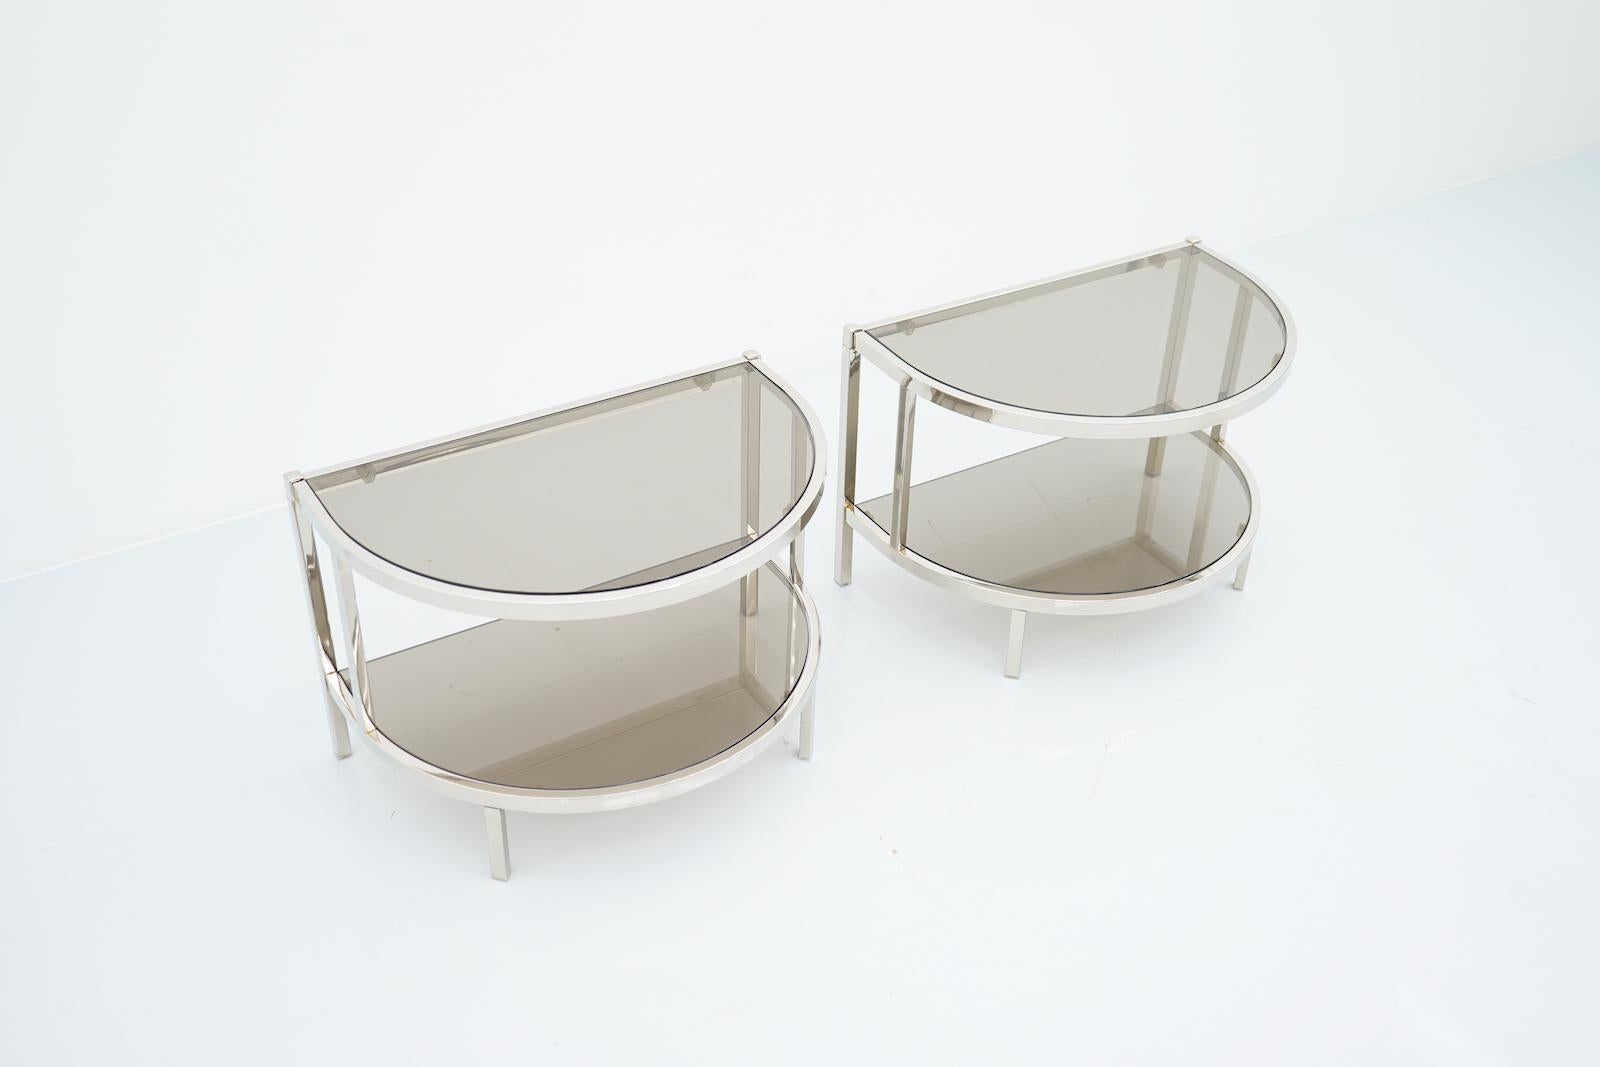 Pair of half round side or bedside tables in chrome and smoked glass, 1970s.

Very good condition.